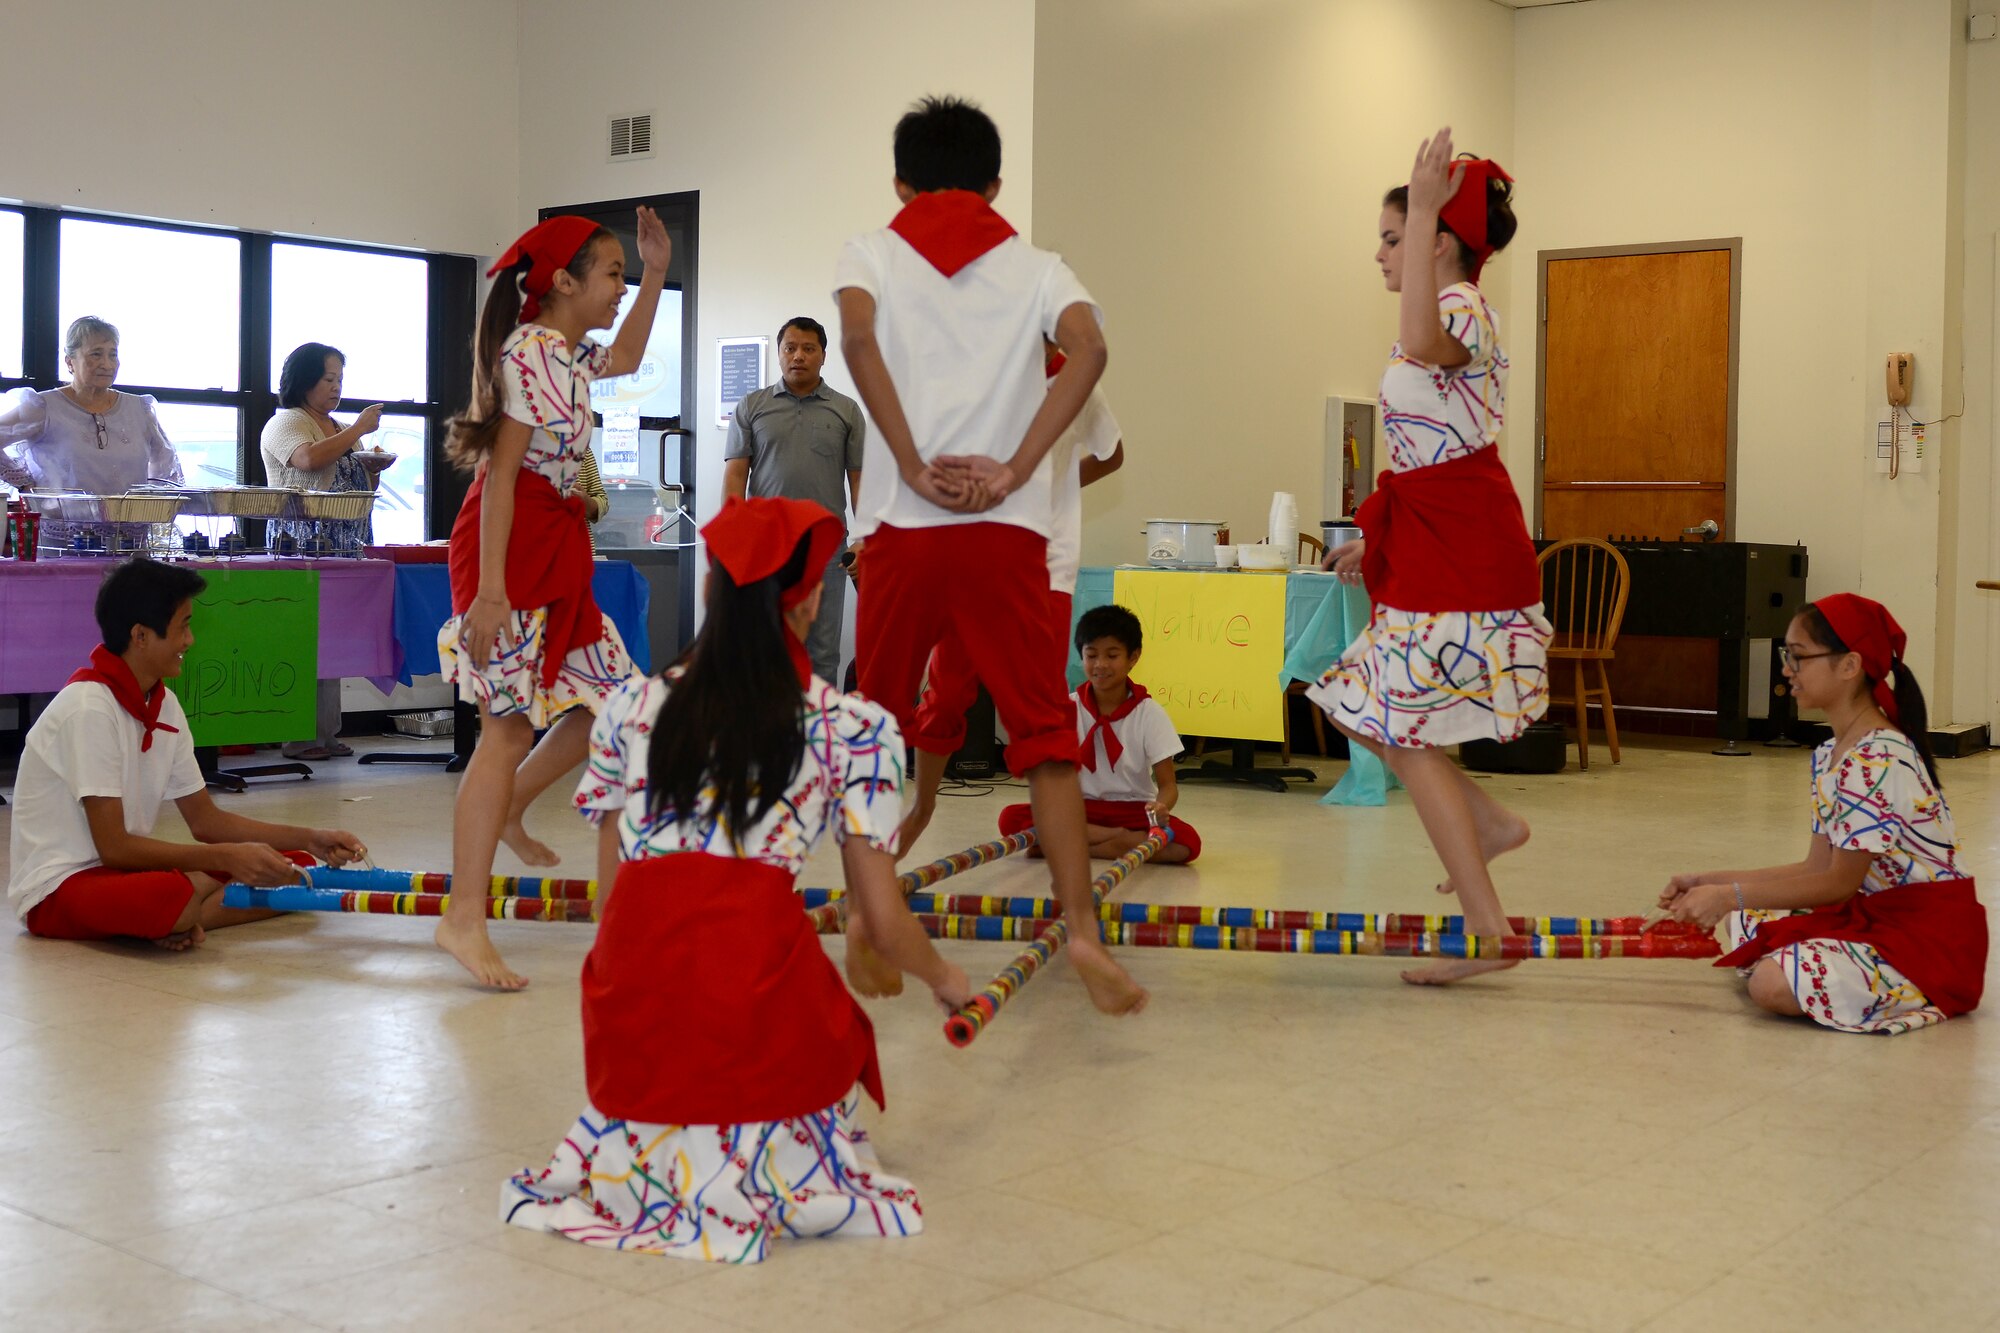 The teen and youth dance troop from the Filipino-American Association of Greater Columbia demonstrates the Filipino-originated Tinikling Dance during “A Taste of McEntire” diversity day celebration at McEntire Joint National Guard Base, S.C., Nov. 7, 2015. Diversity Day combines the Department of Defense's monthly diversity programs into a one day event for guardsmen to learn about other cultures and to celebrate diversity. (U.S. Air National Guard photo by Airman 1st Class Ashleigh Pavelek/RELEASED)